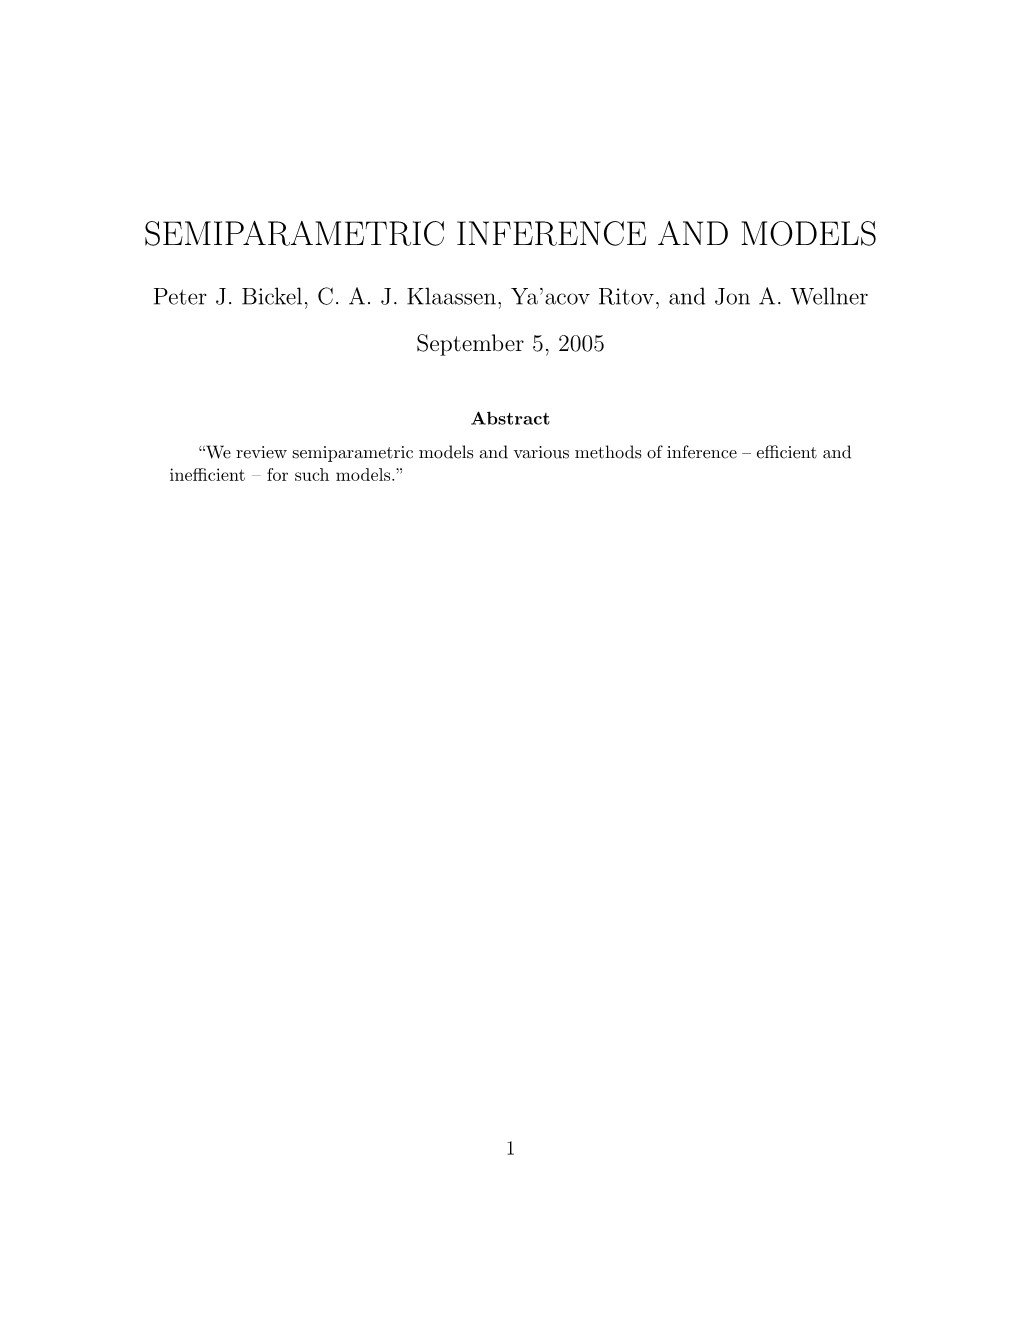 Semiparametric Inference and Models